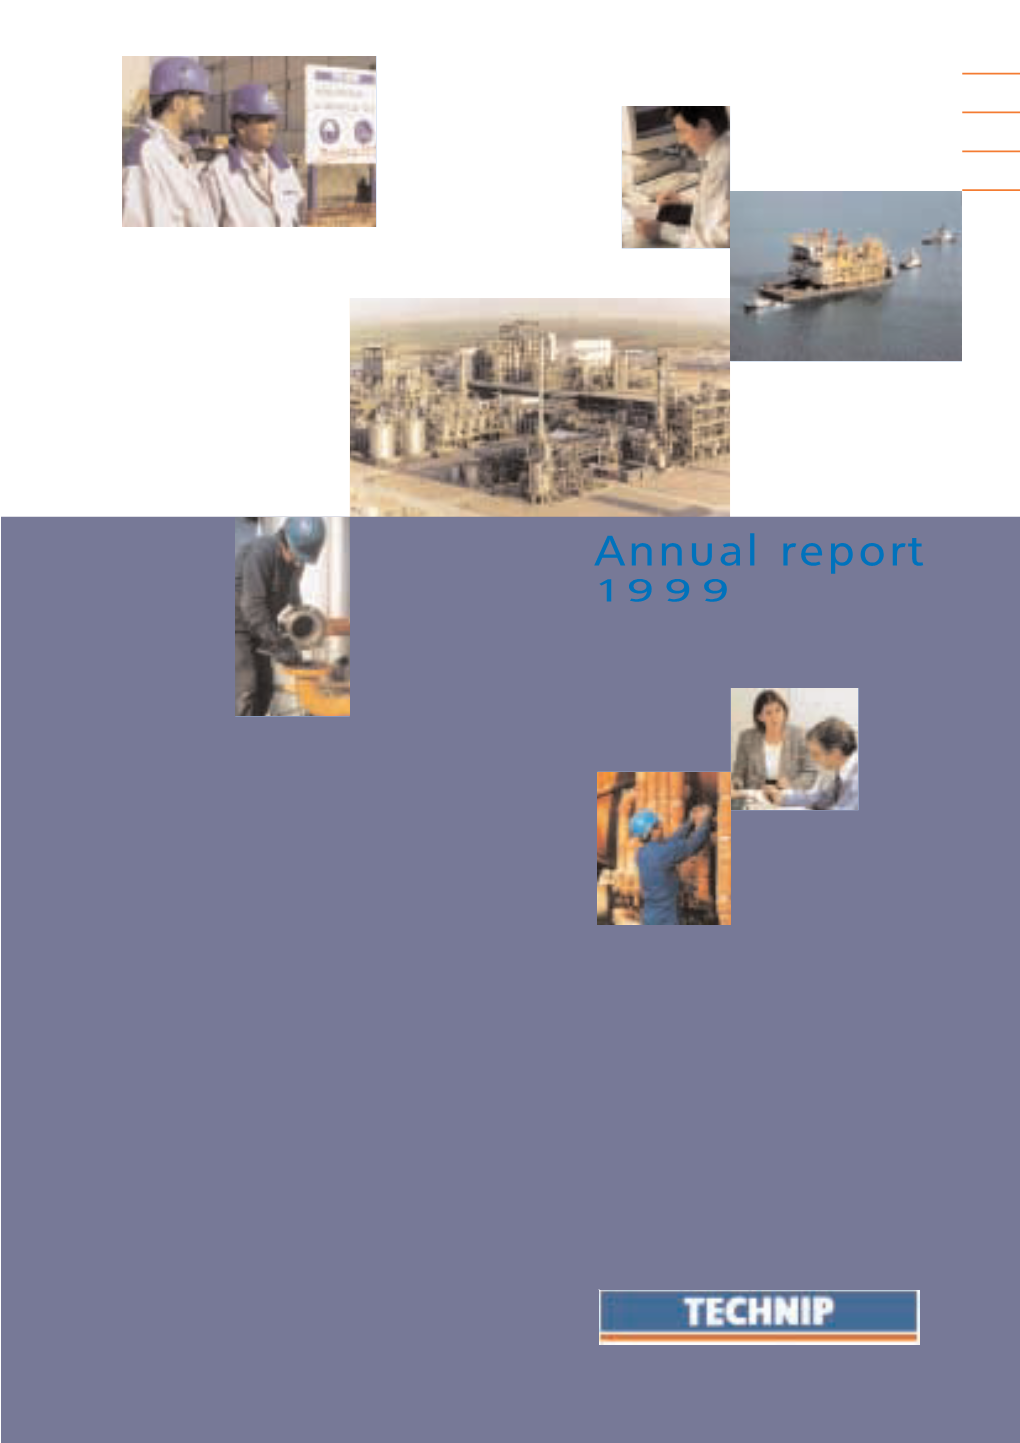 Annual Report 1999 Contents